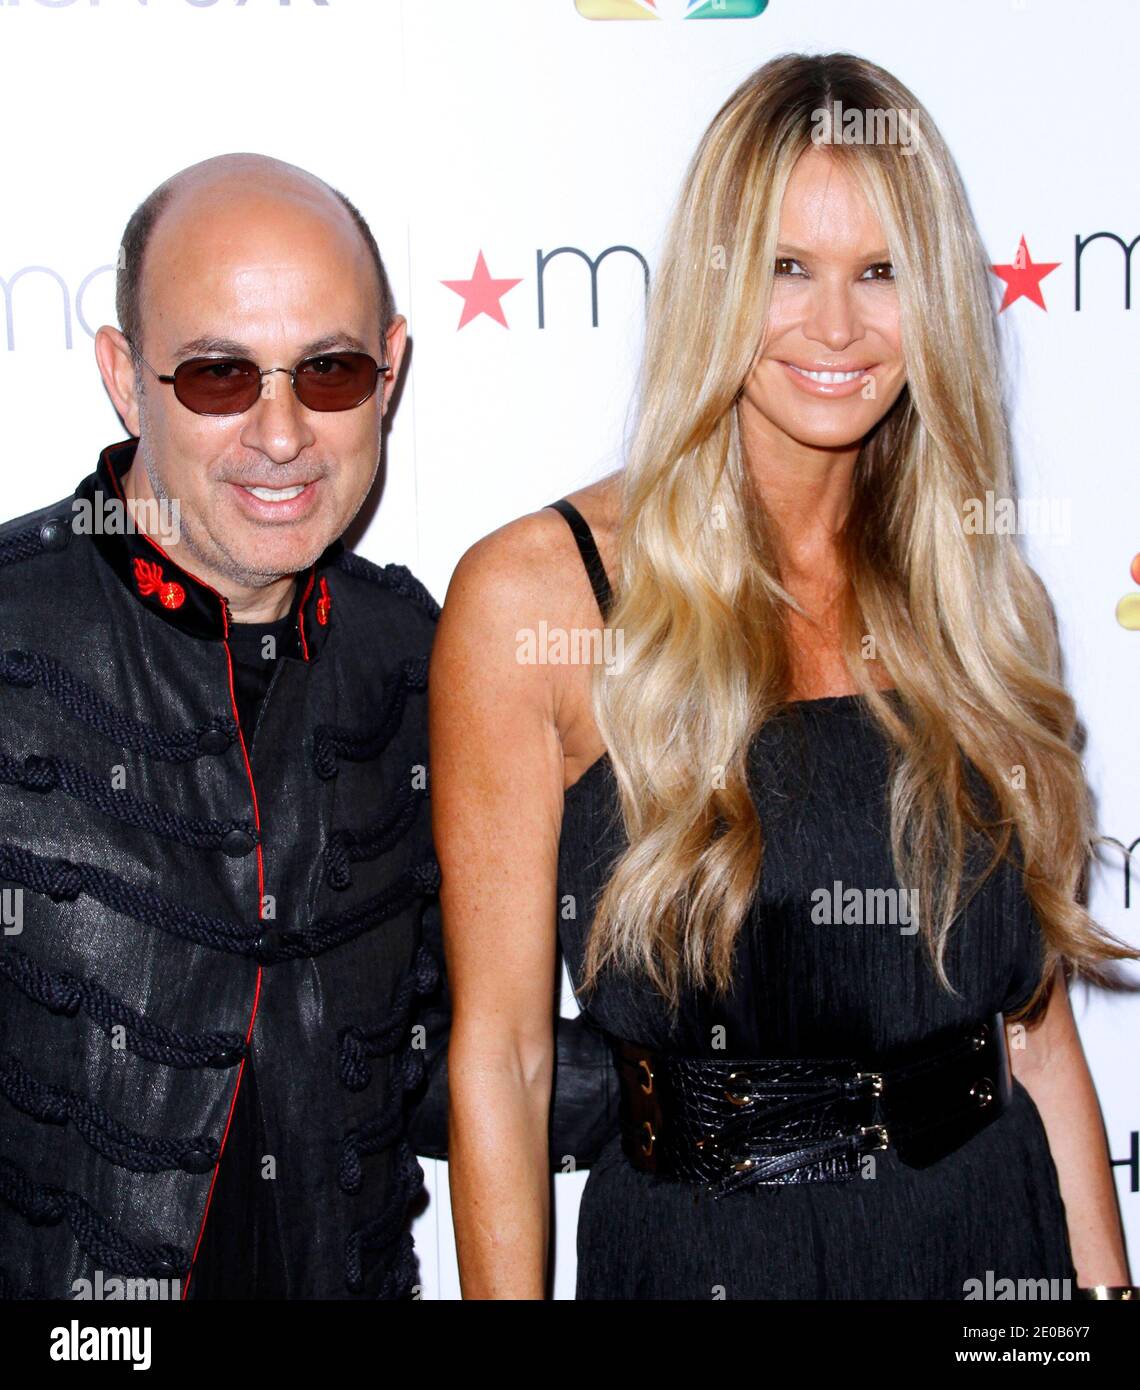 John Varvatos and Elle MacPherson attend the Fashion Star Premiere at Macy's Herald Square in New York City, NY, USA on March 13, 2012. Photo by Donna Ward/ABACAPRESS.COM Stock Photo